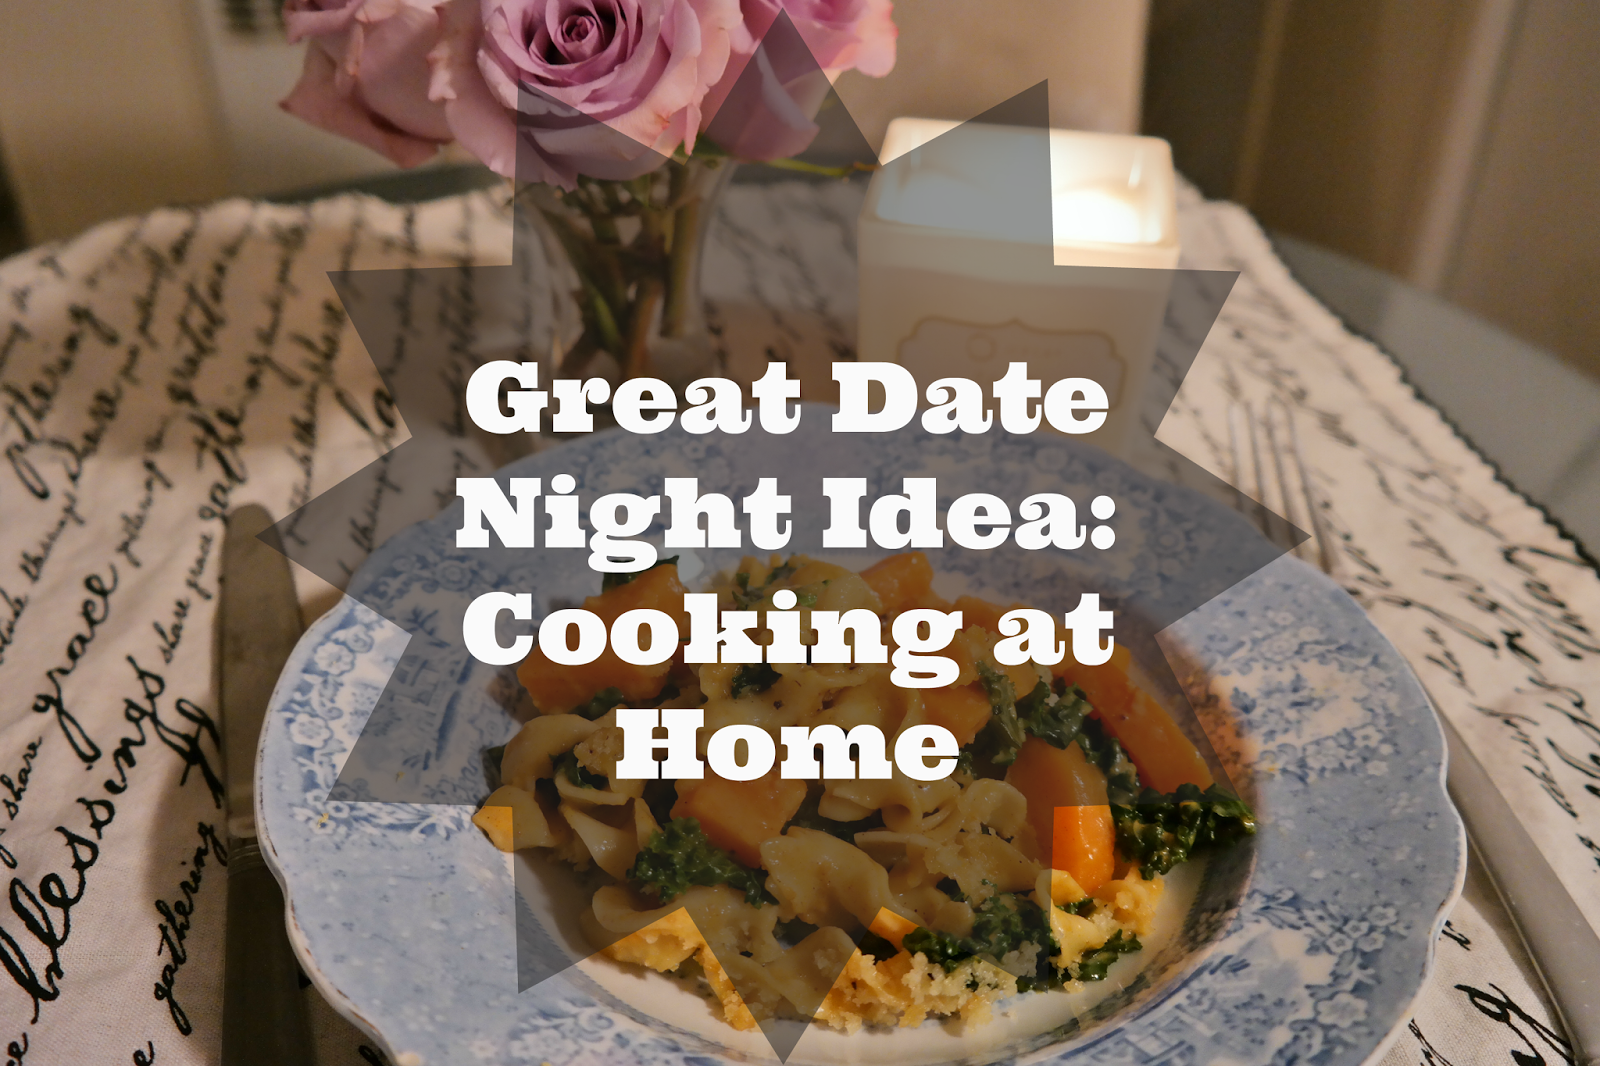 Best Date Night Idea | Cooking at Home